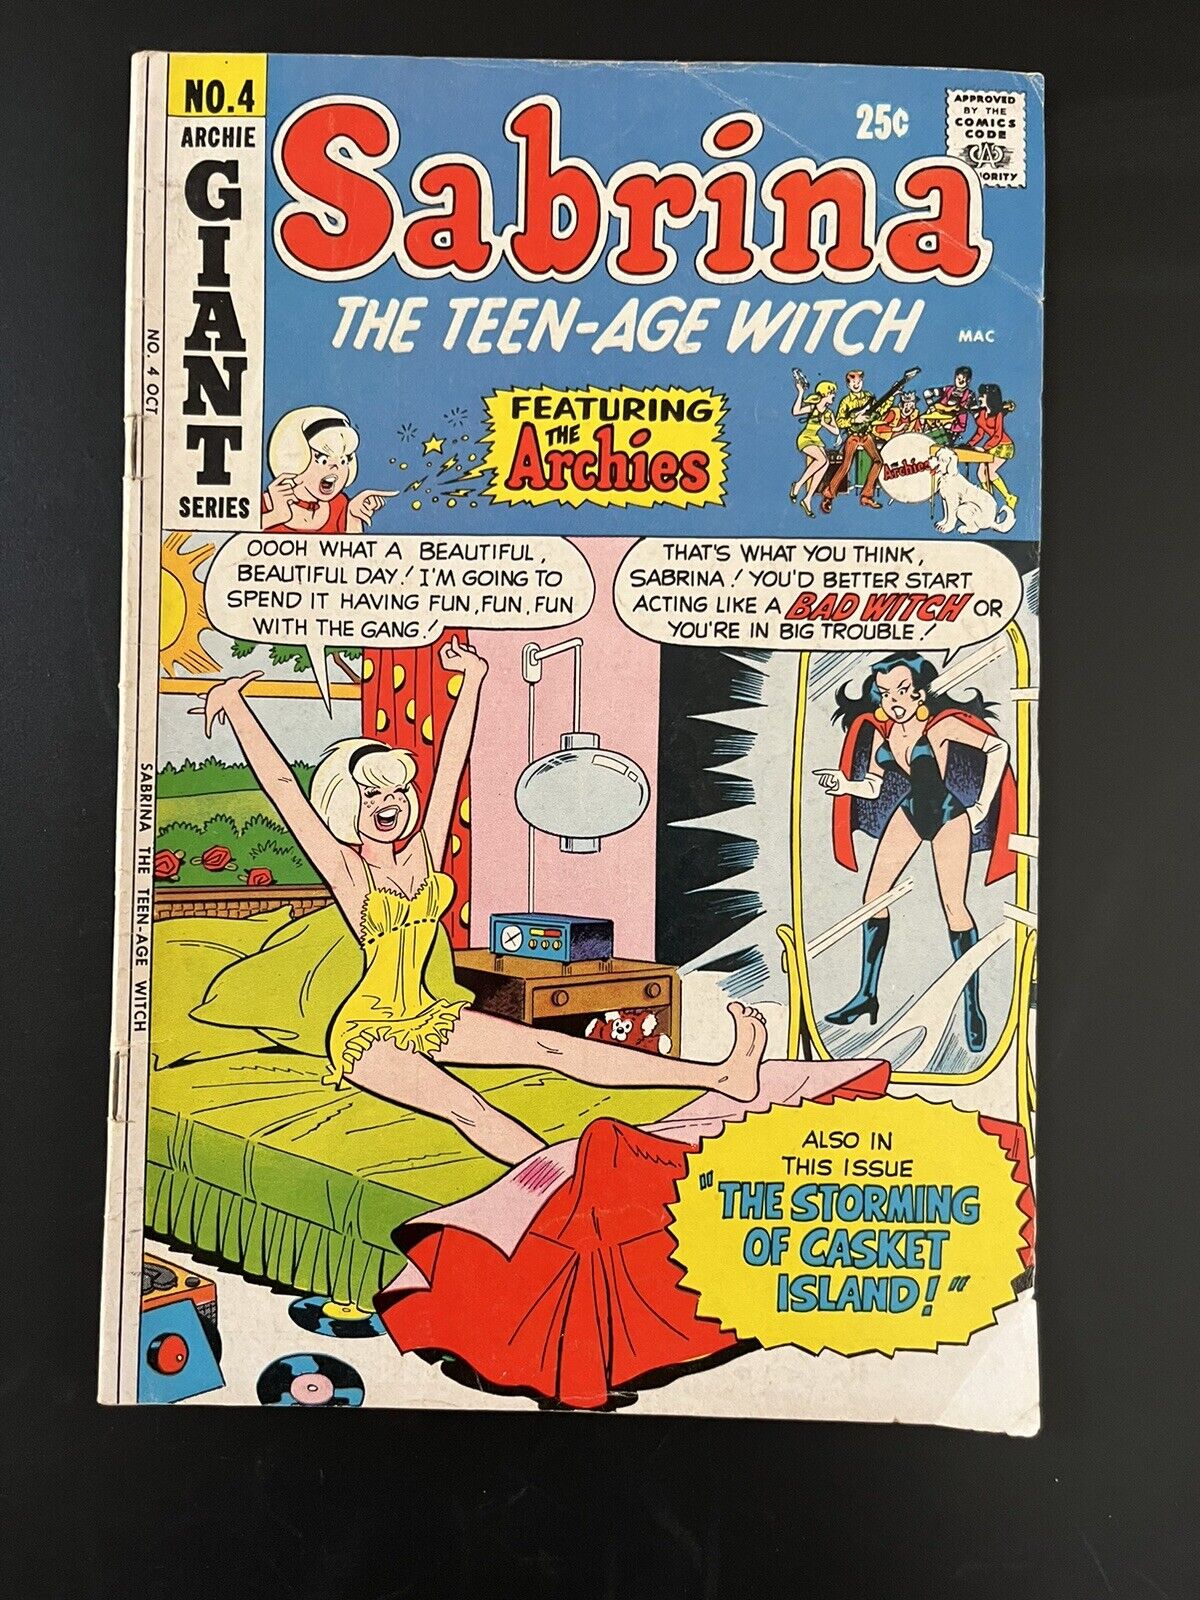 Sabrina The Teen-age Witch #4  (Oct 1971) Archie Giant Series